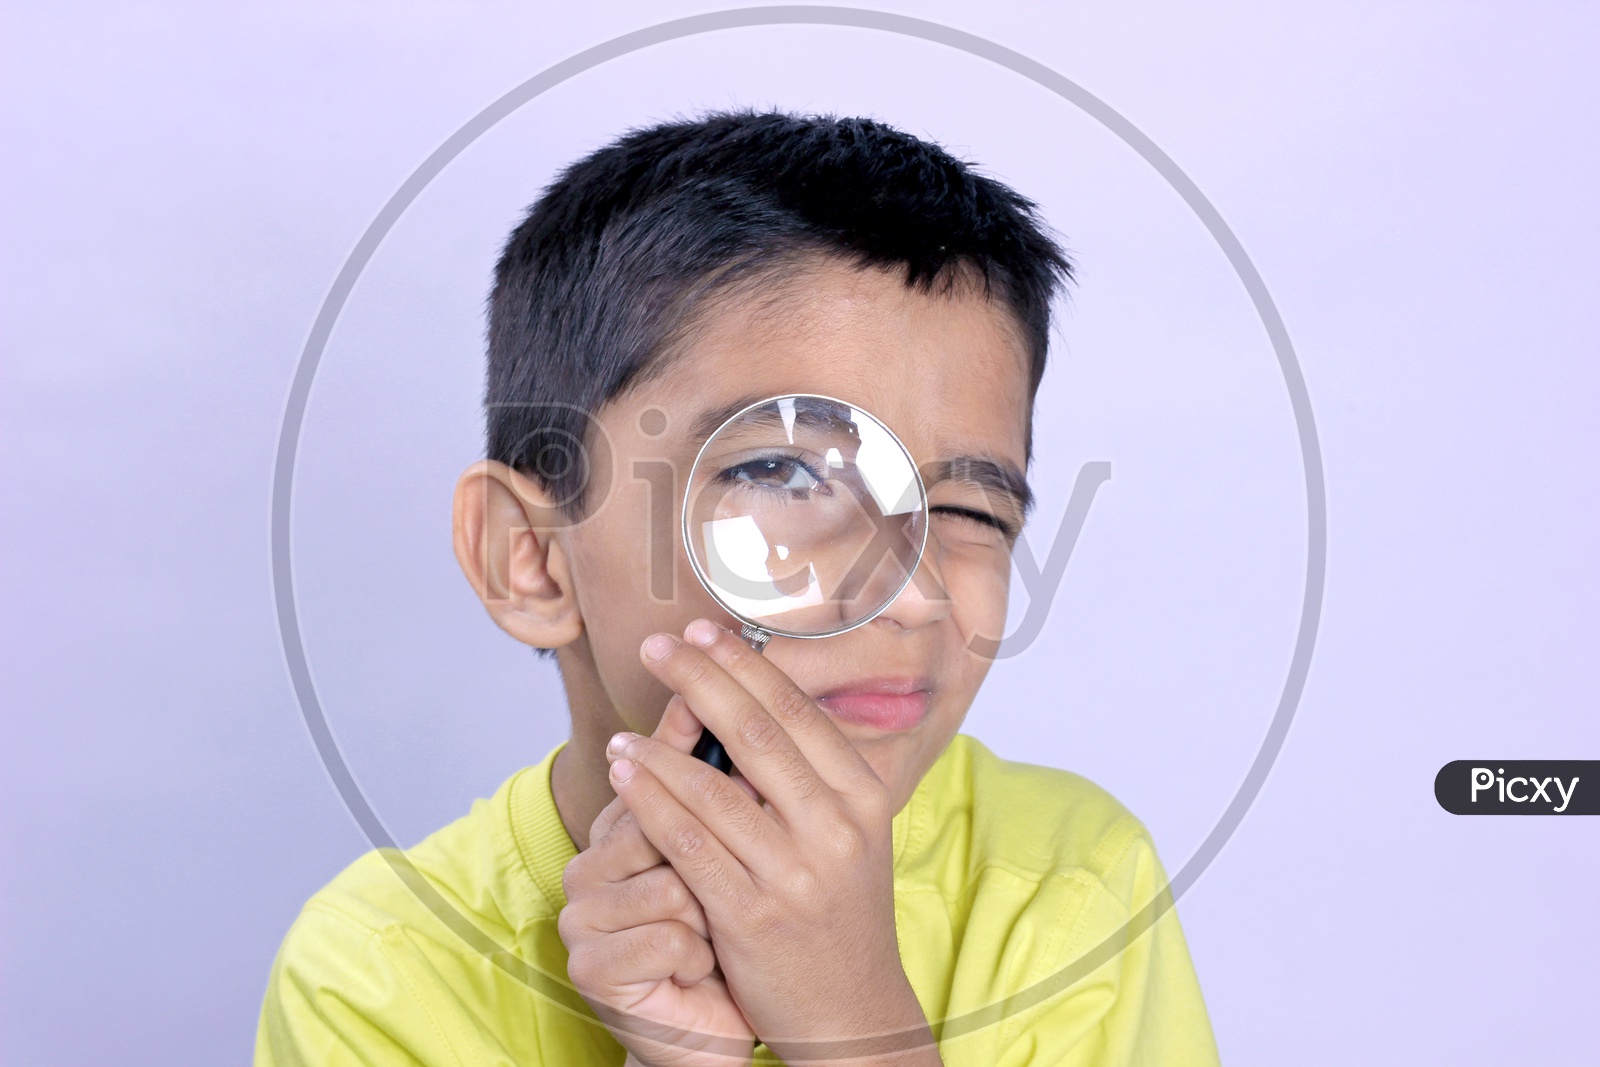 Indian Child Holding Magnifying Glass